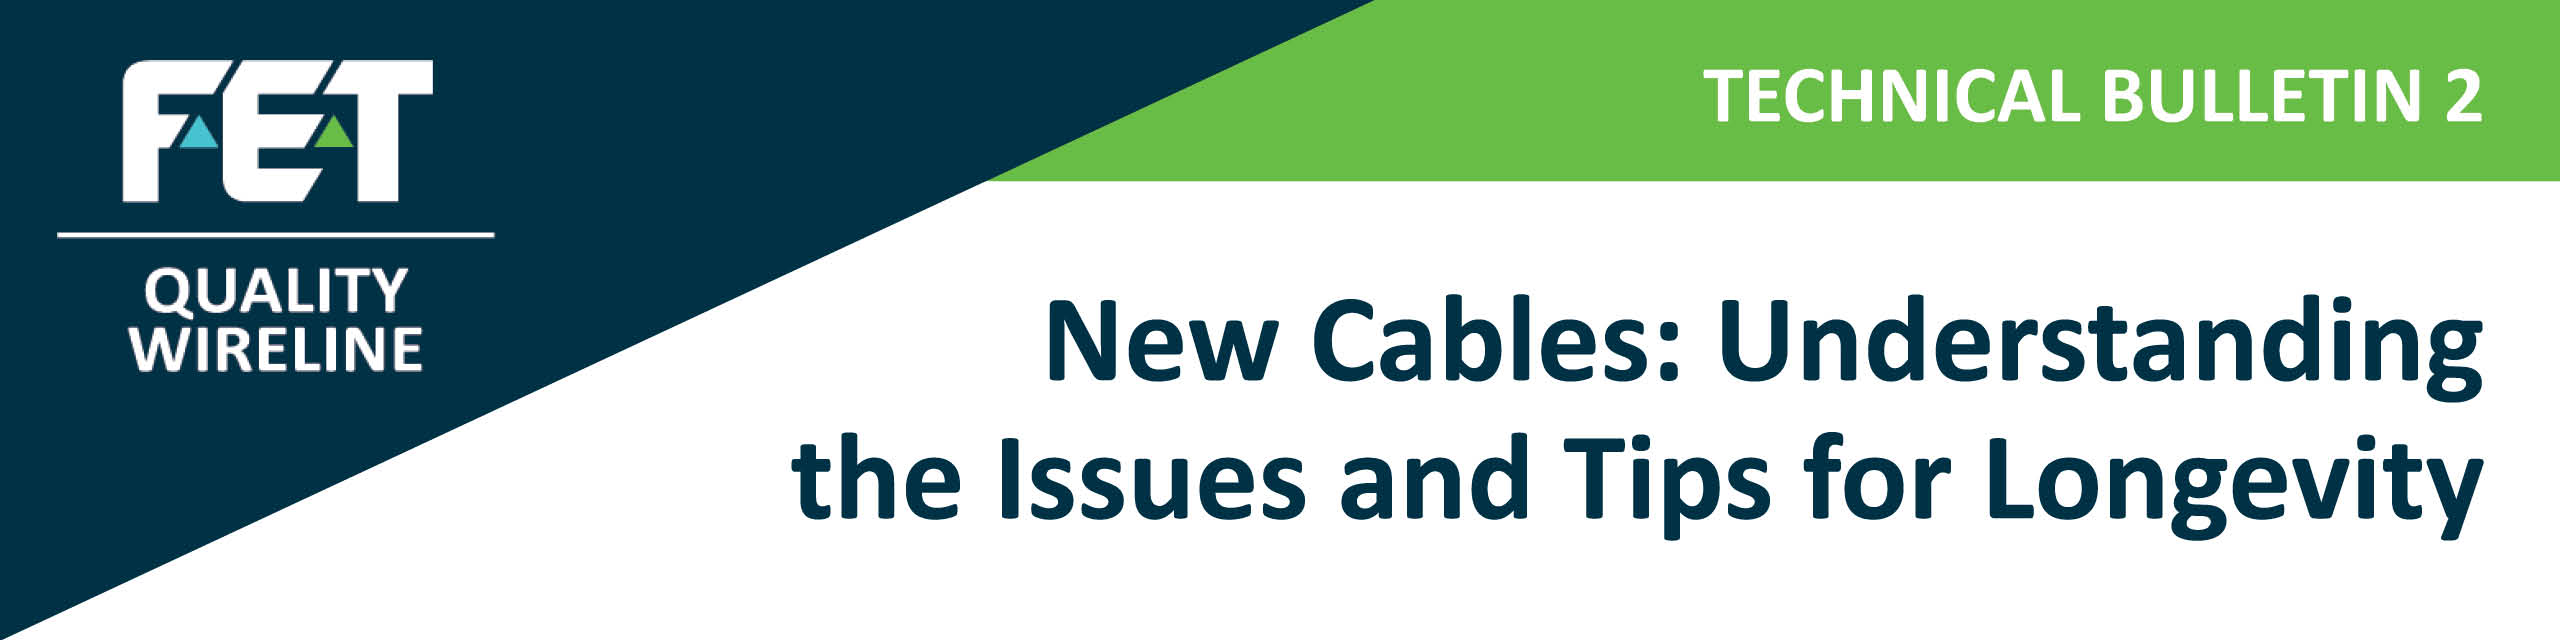 Tech Bulletin 2 ― New Cables: Understanding Issues and Tips for Longevity